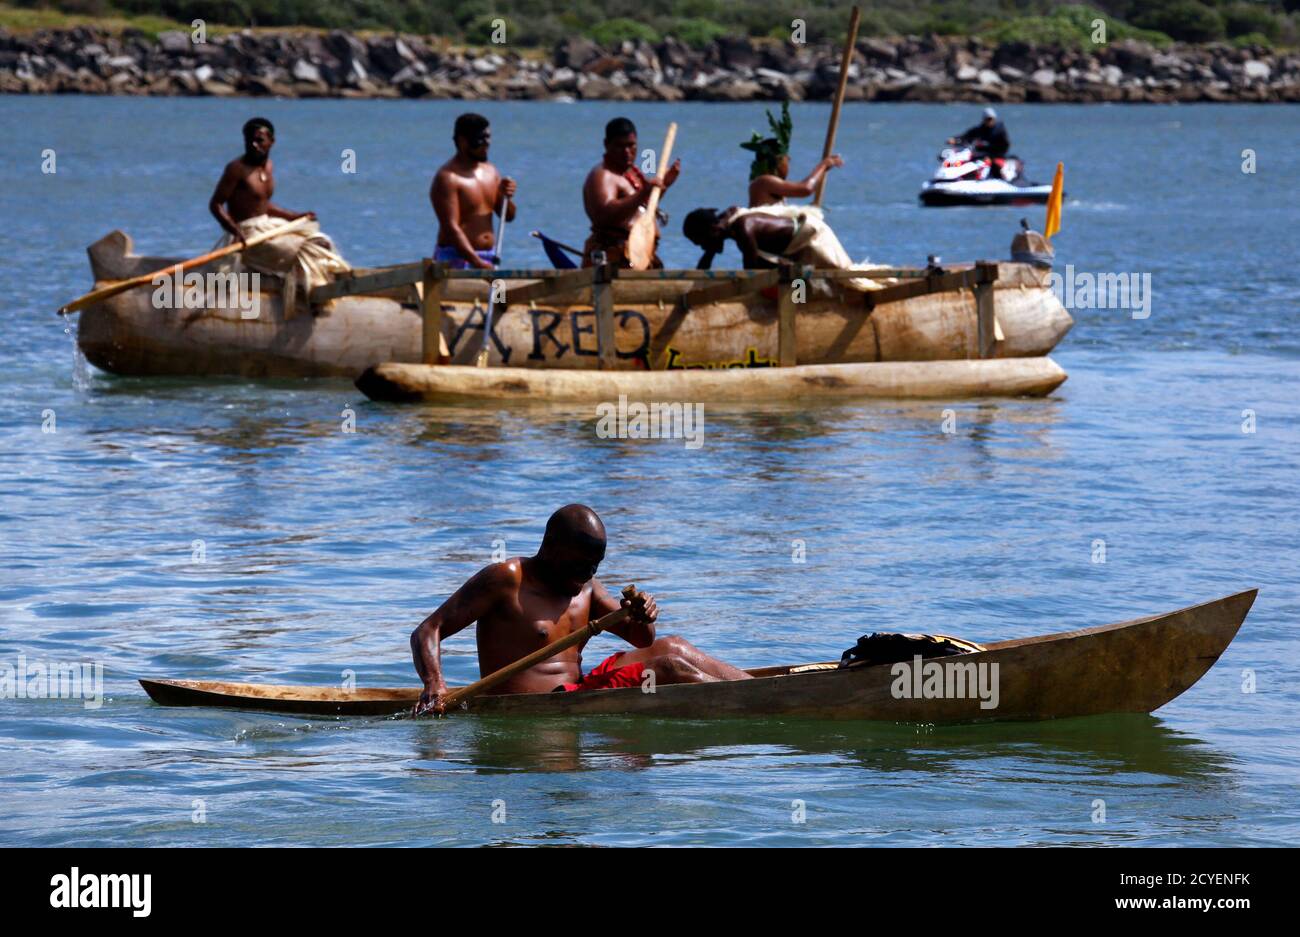 Fahrenheit Chemie pindas A policeman on a jet-ski watches as traditionally dressed representatives  from South Pacific nations paddle their canoes as they prepare to  participate in a protest aimed at ships leaving the Newcastle coal